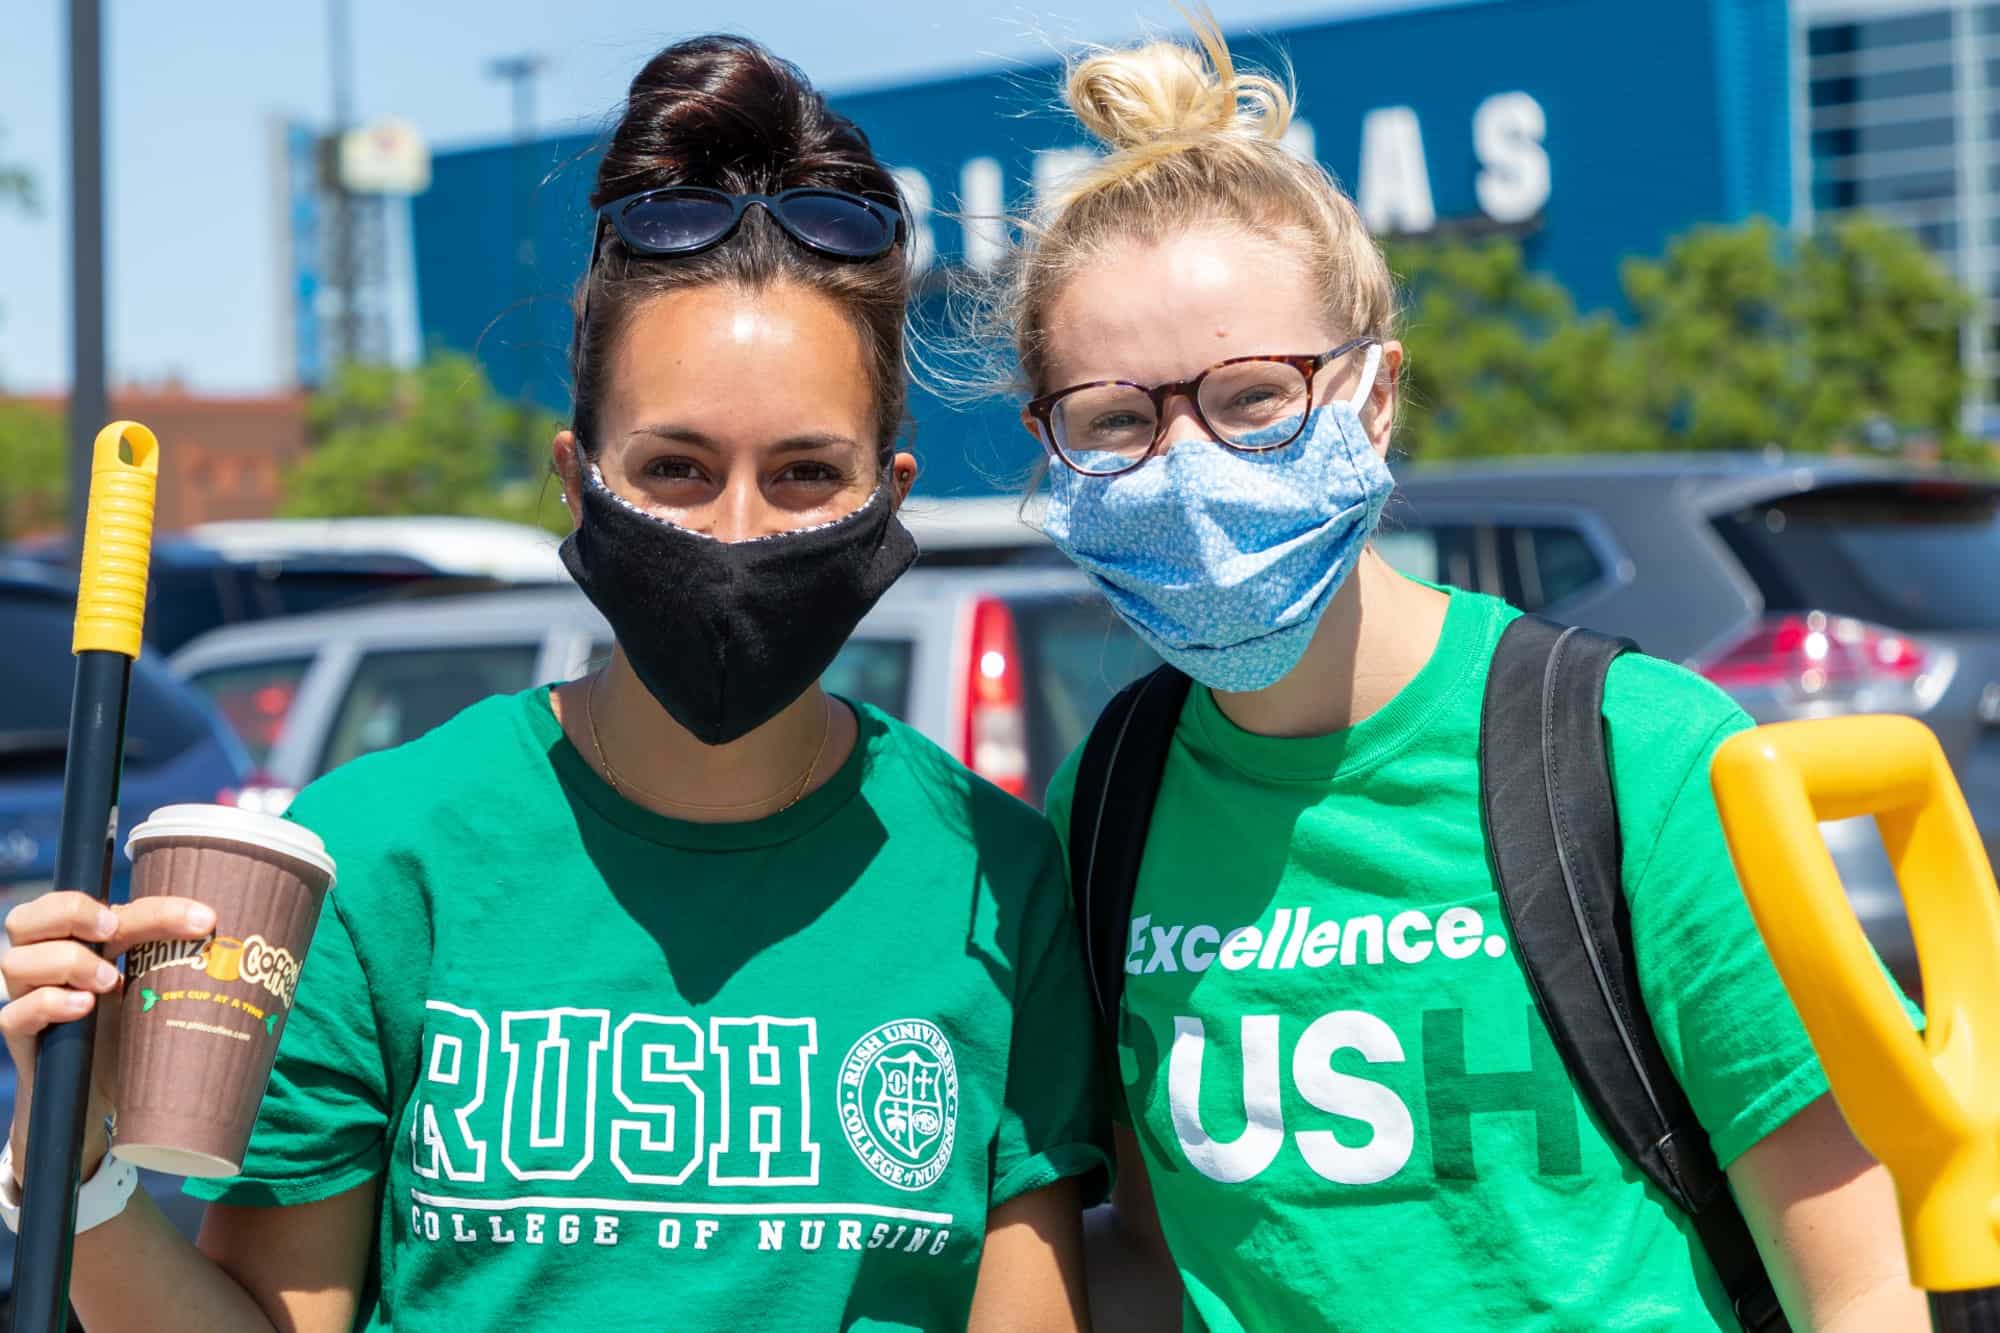 Two students wearing Rush University T-shirts and holding cleaning supplies